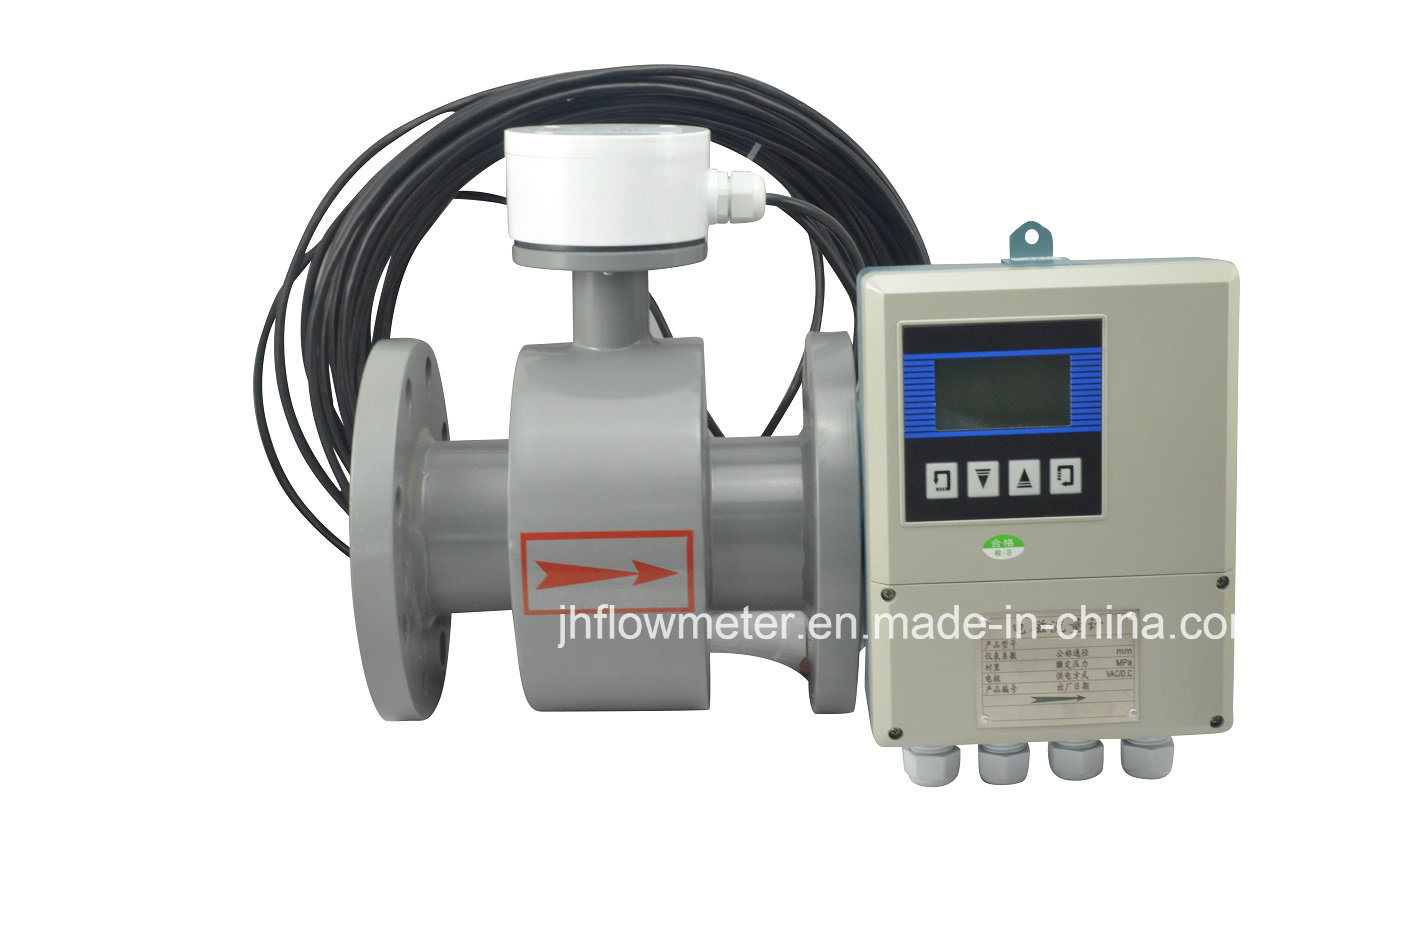 New Hight Quality Europe Standard Magnetic Flow Meter (JH-DCFM-R)